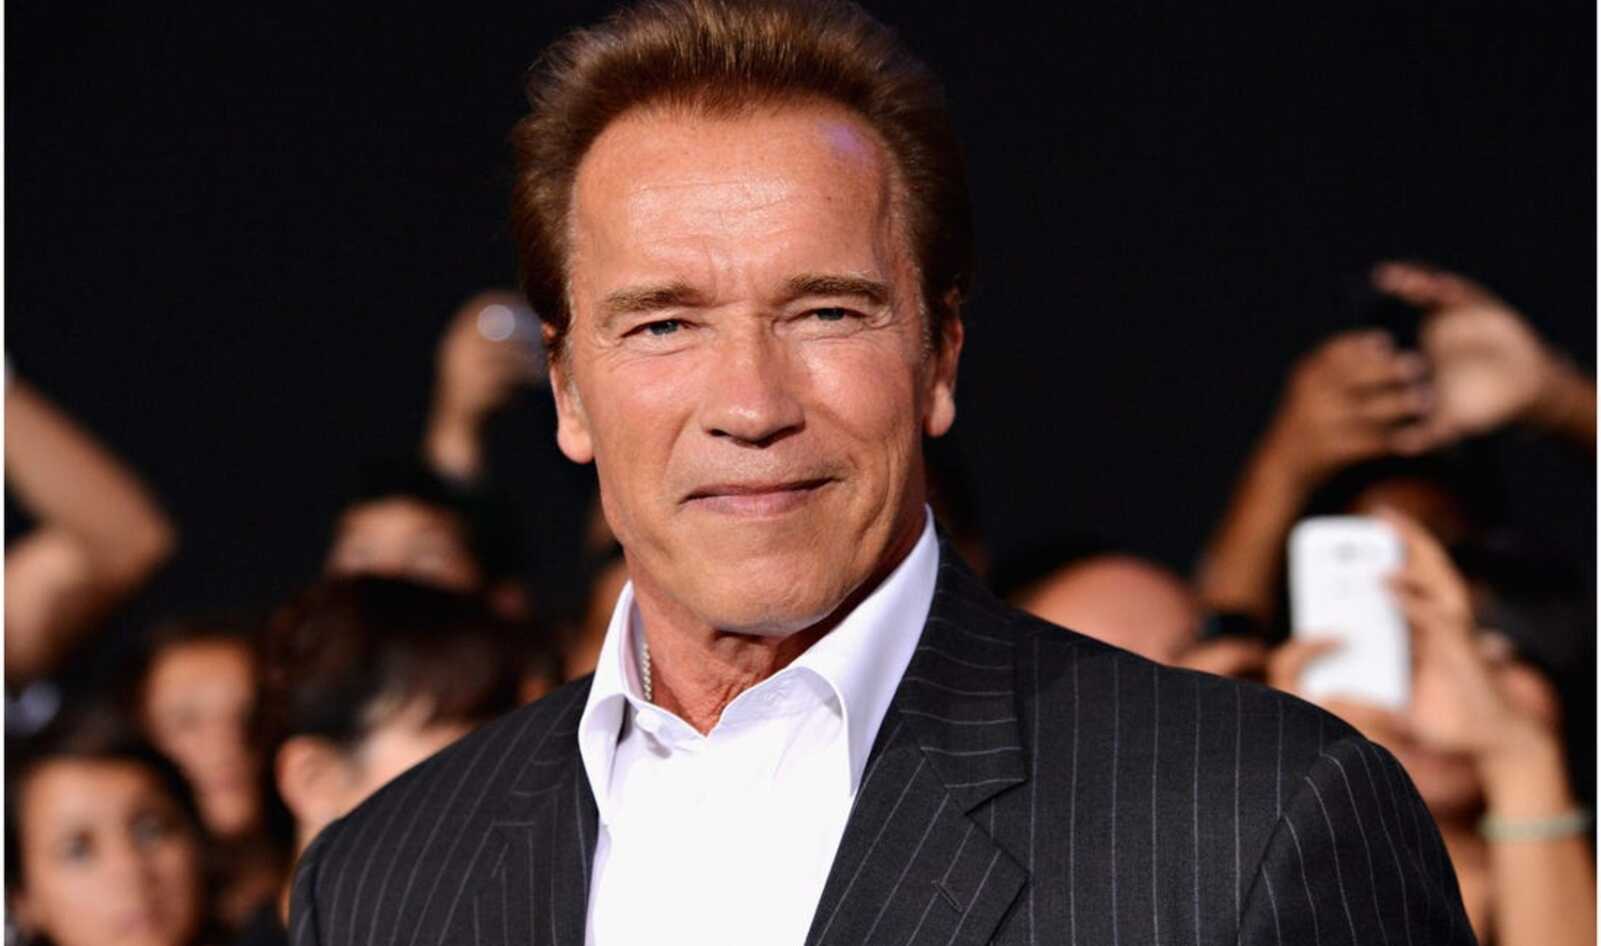 Arnold Schwarzenegger Settles Down at Home With Vegan Food and Animal Friends